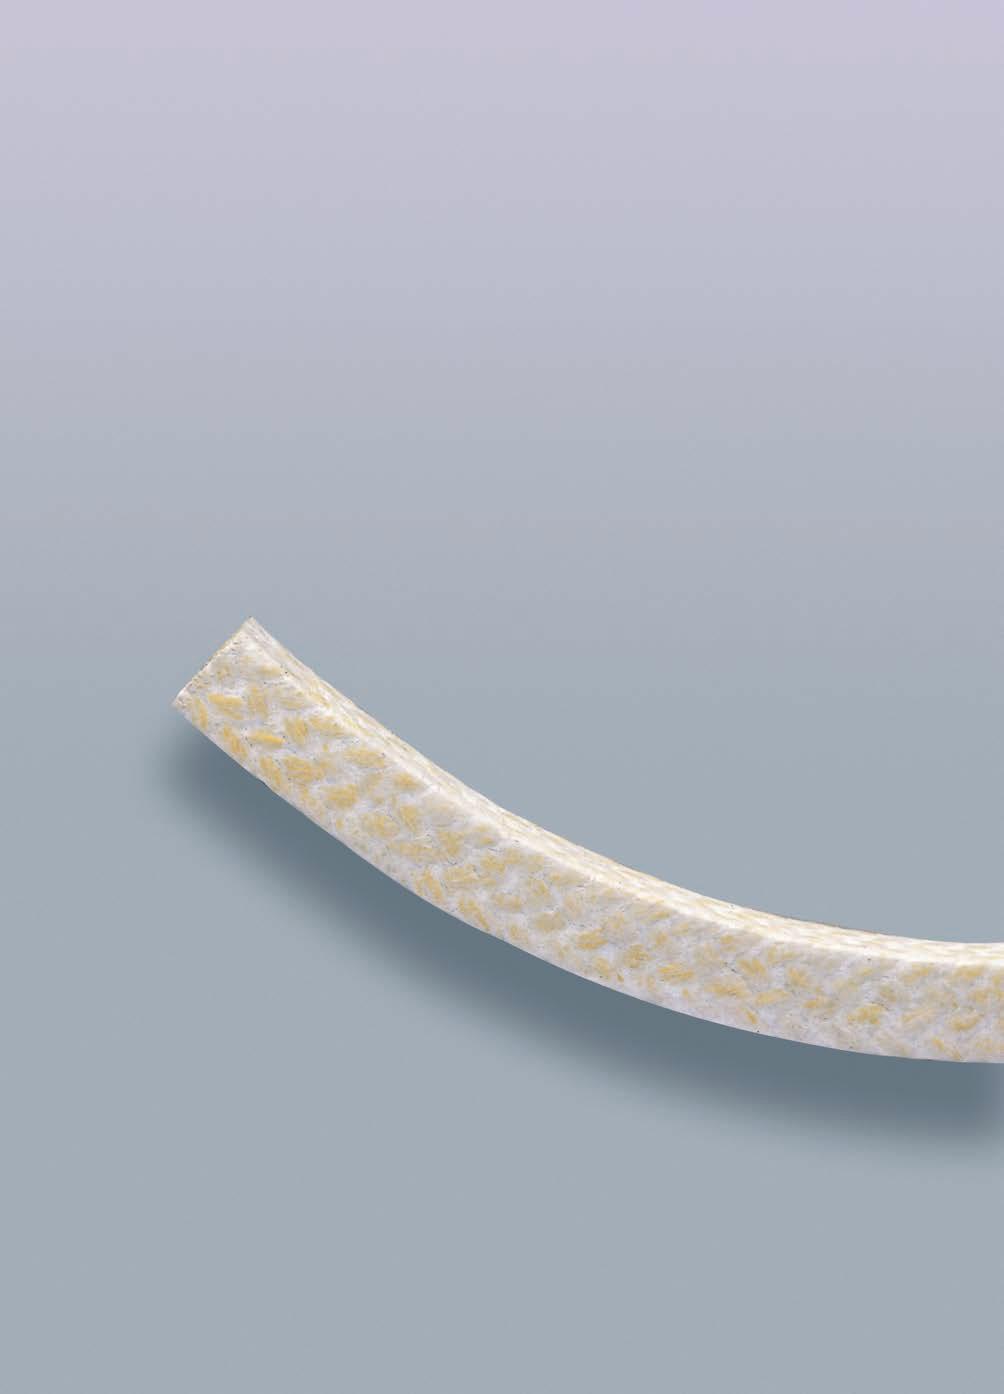 SX9030 PACKINGS SX9031 PACKINGS SX9030 SX9031 SX9030 discontinuous aramidic + lubricated PTFE SX9031 kevlar + pbi on corners Braid packing consisting of discontinuous fibre aramidic yarn with